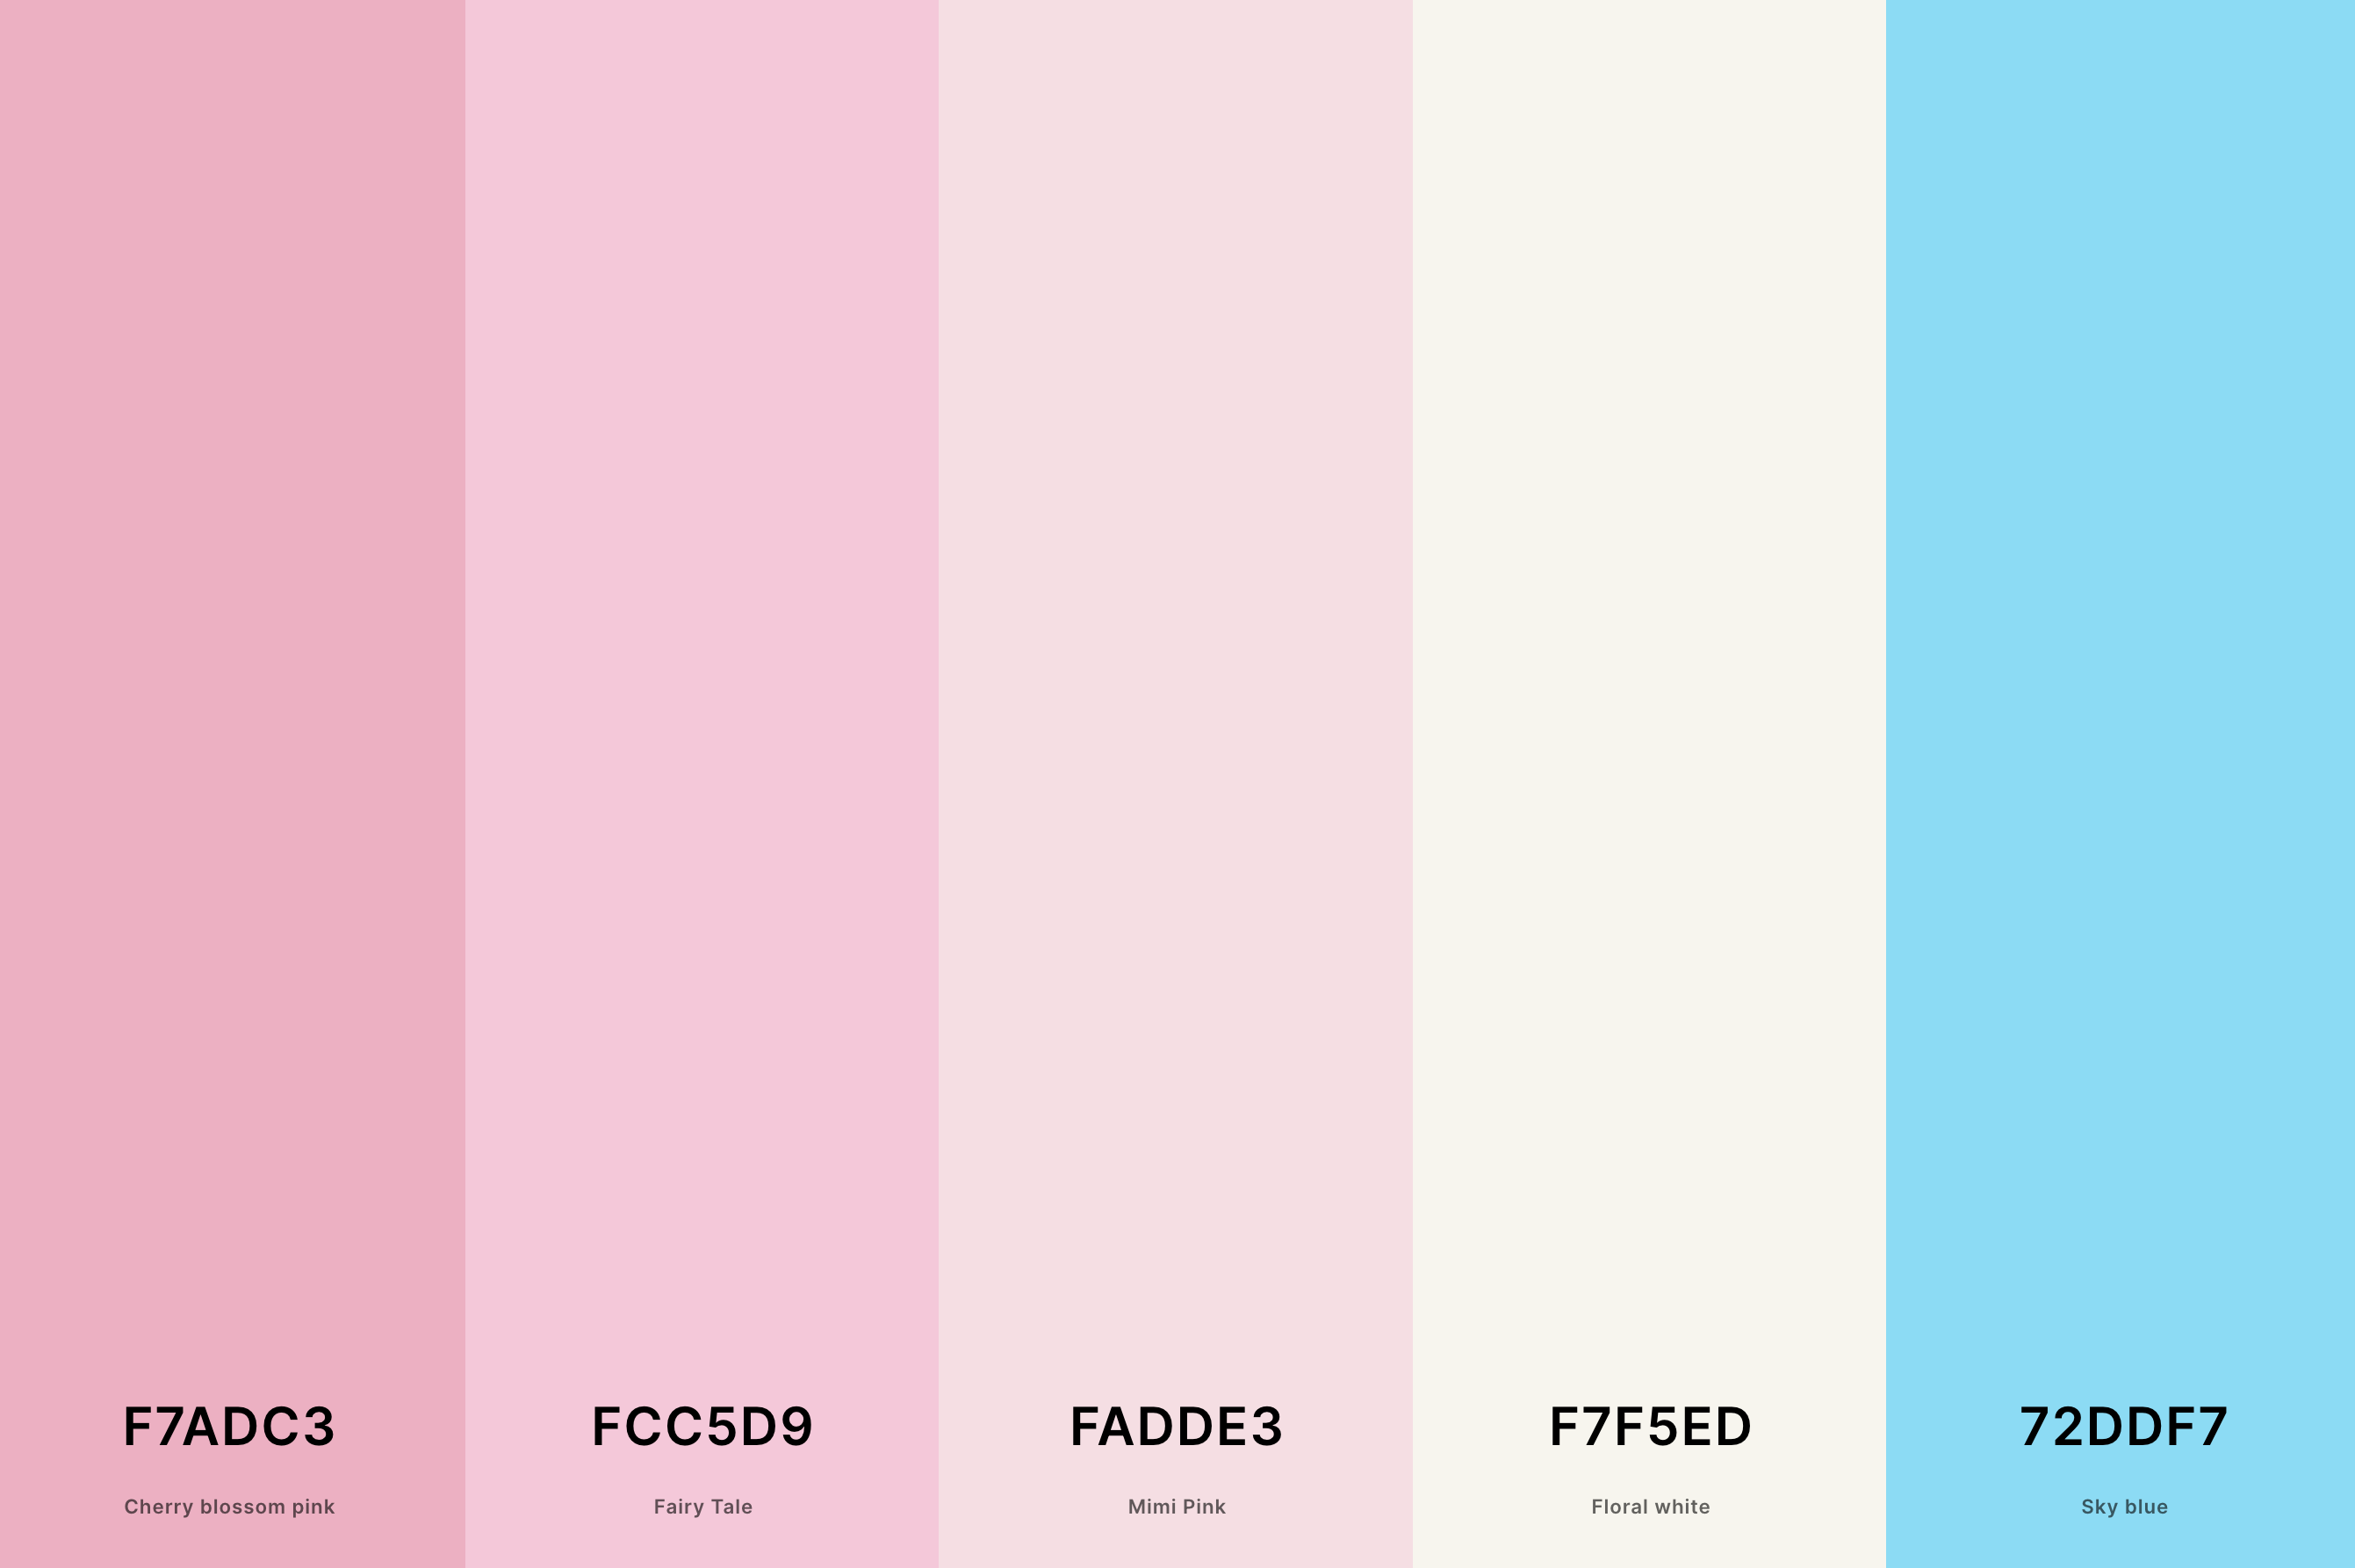 4. Pastel Pink Color Palette Color Palette with Cherry Blossom Pink (Hex #F7ADC3) + Fairy Tale (Hex #FCC5D9) + Mimi Pink (Hex #FADDE3) + Floral White (Hex #F7F5ED) + Sky Blue (Hex #72DDF7) Color Palette with Hex Codes